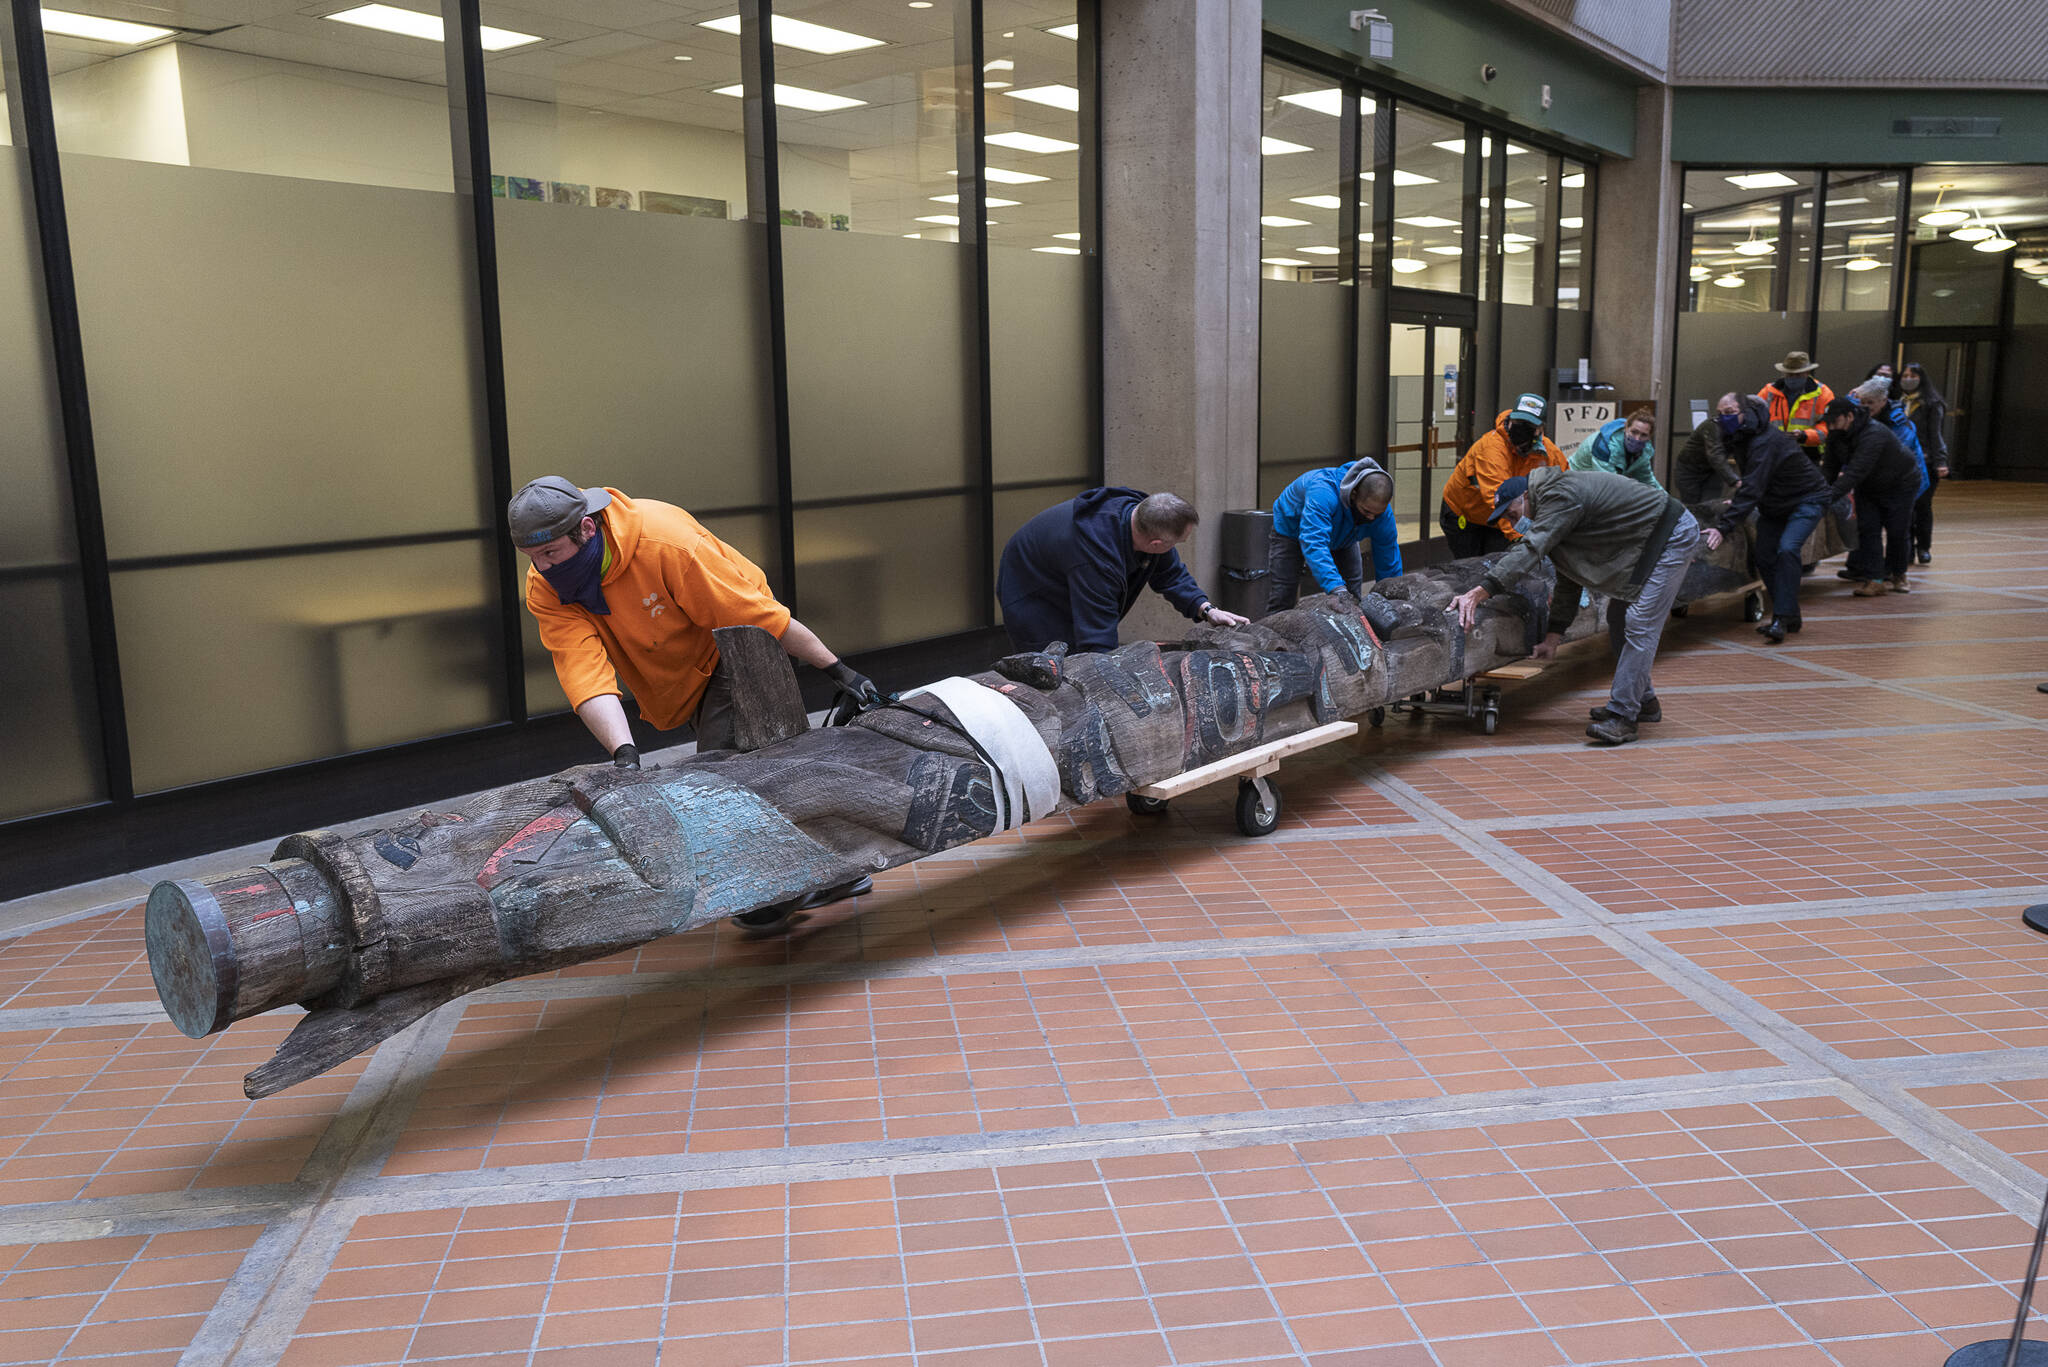 Workers move the Wooshkeetaan Kootéeyaa (totem pole) through the state office building on Oct. 15. After a few weeks of laying flat so that it can adjust to the climate inside the building, the totem pole will be raised and a celebration will be planned. (Michael Penn / For the Jundeau-Douglas City Museum)